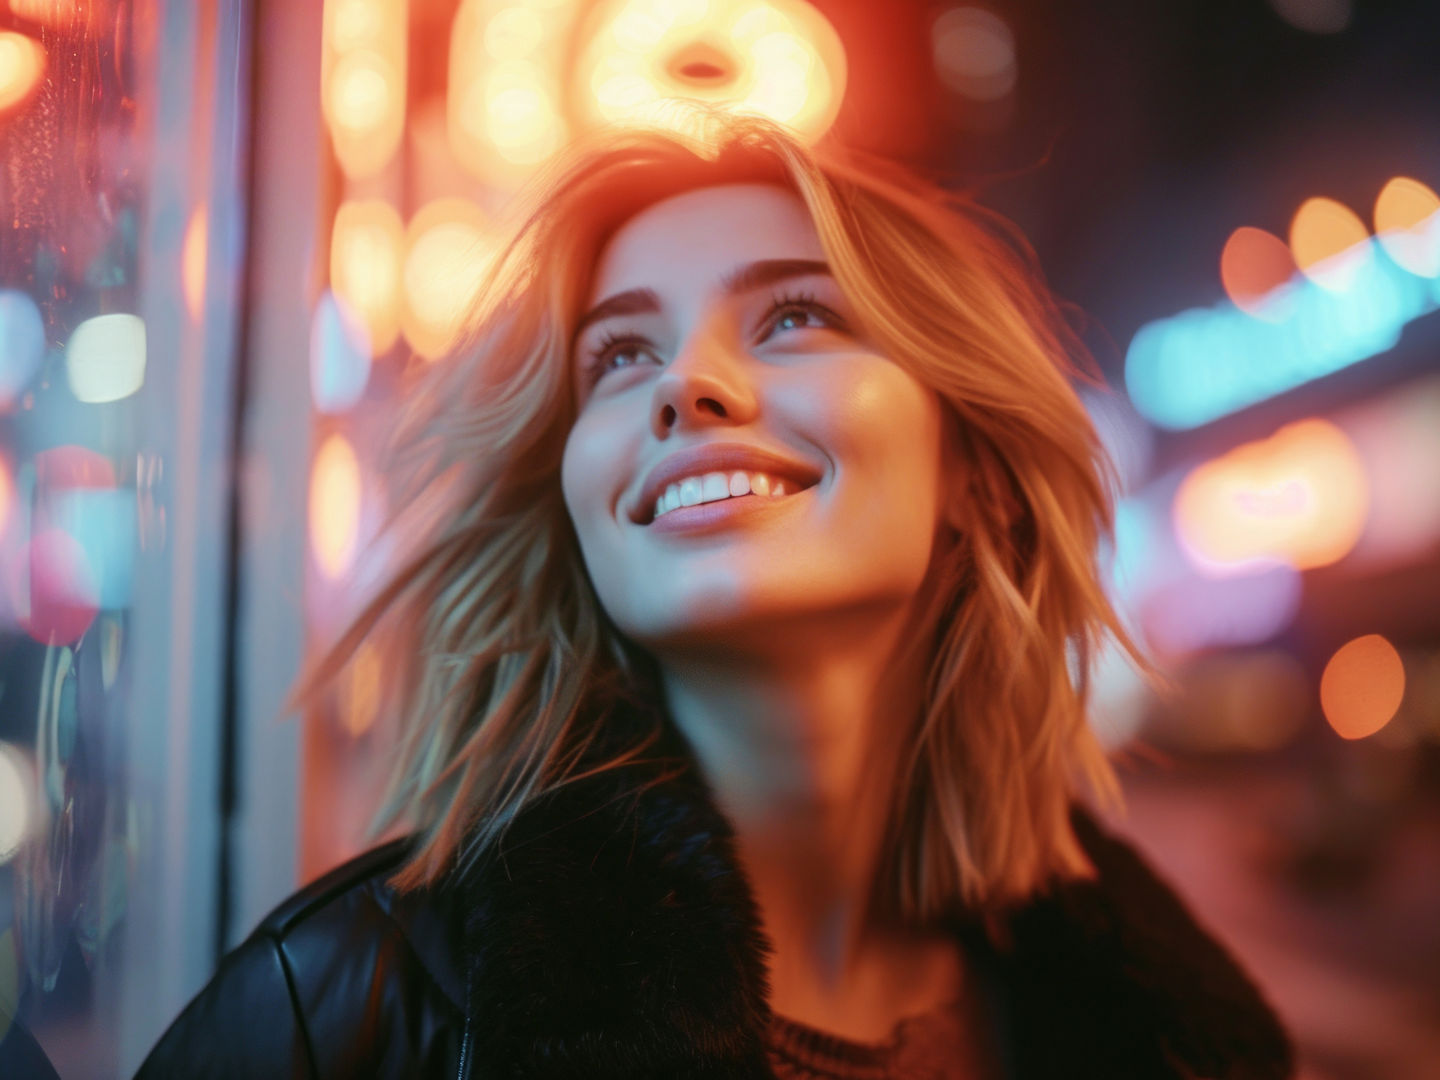 A young smiling blonde woman in the evening city illuminated by neon light